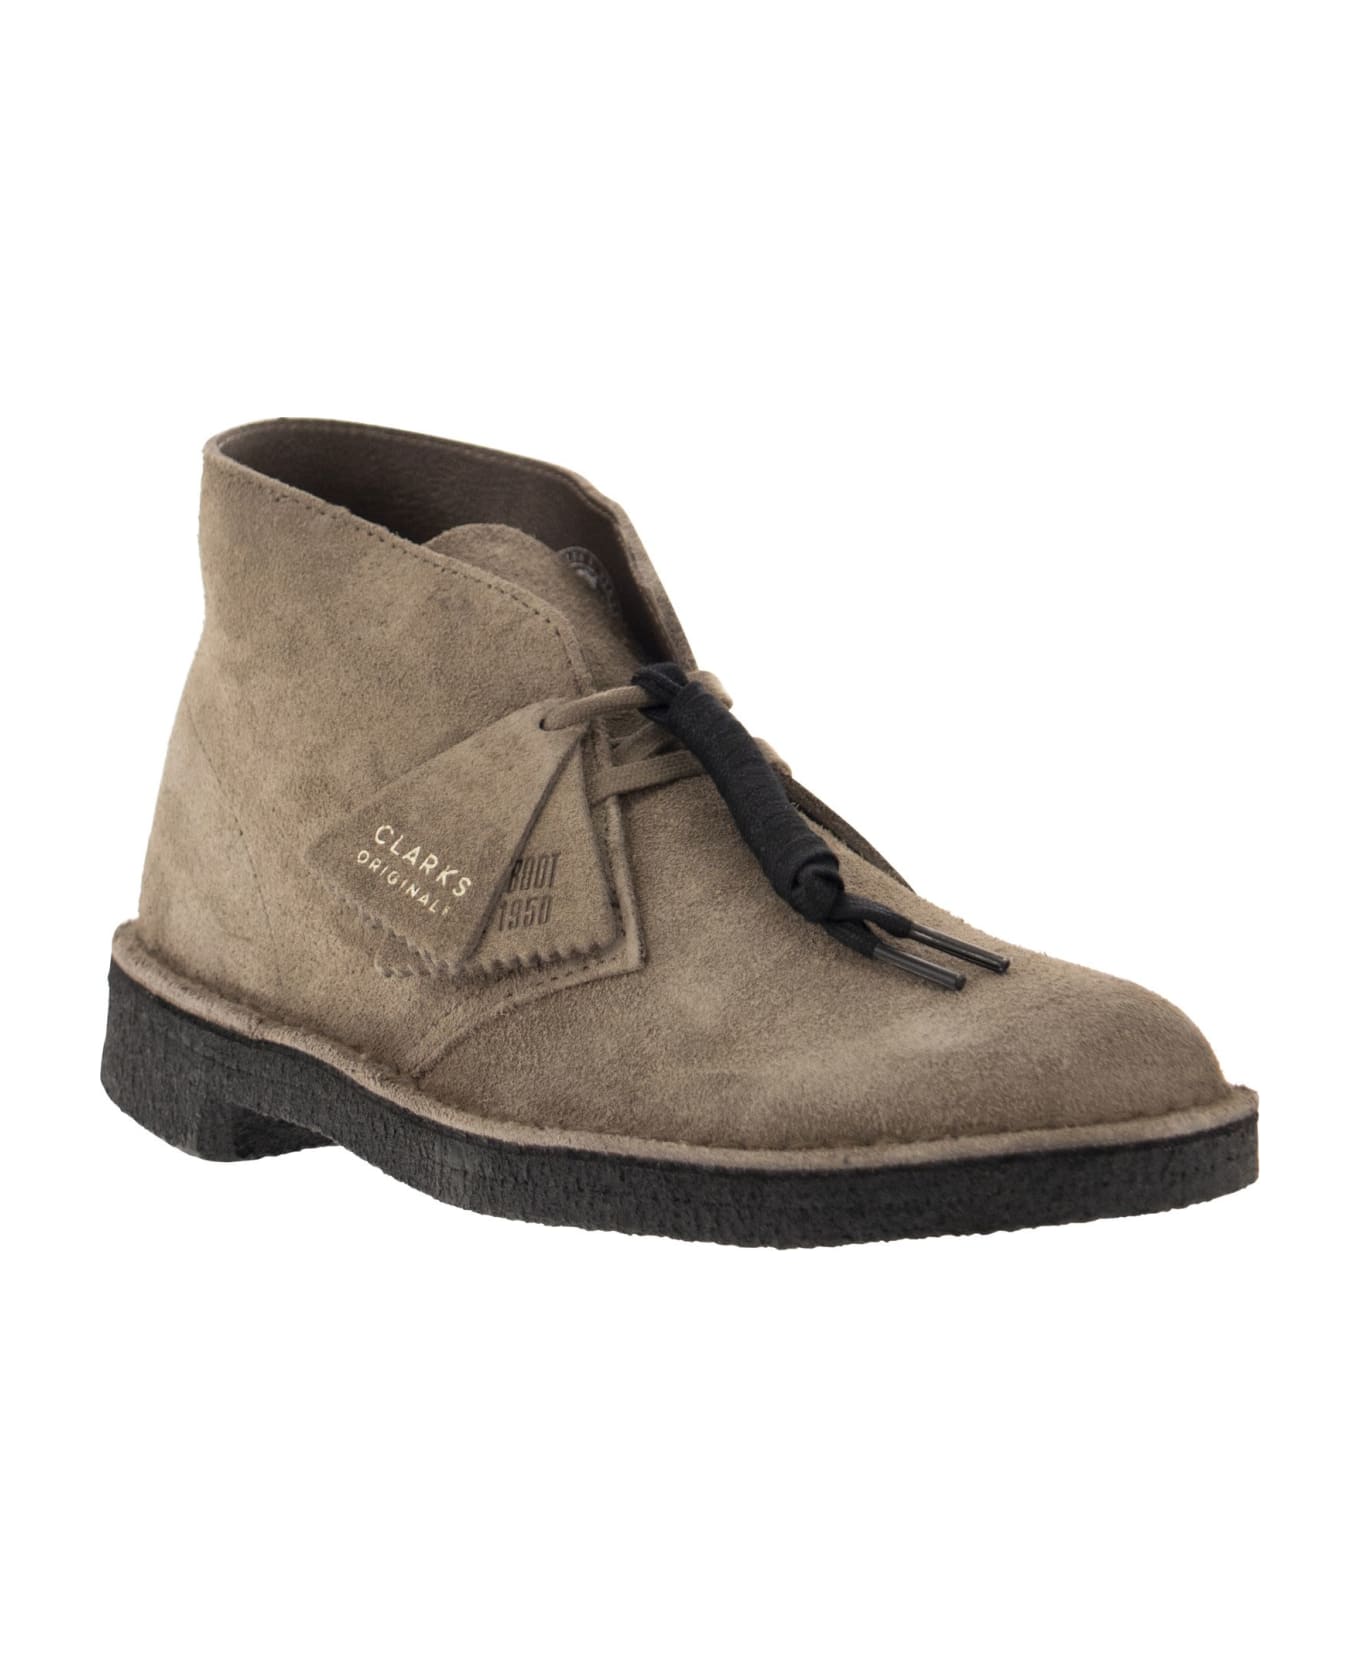 Clarks Desert Boot - Lace-up Boot - Grey